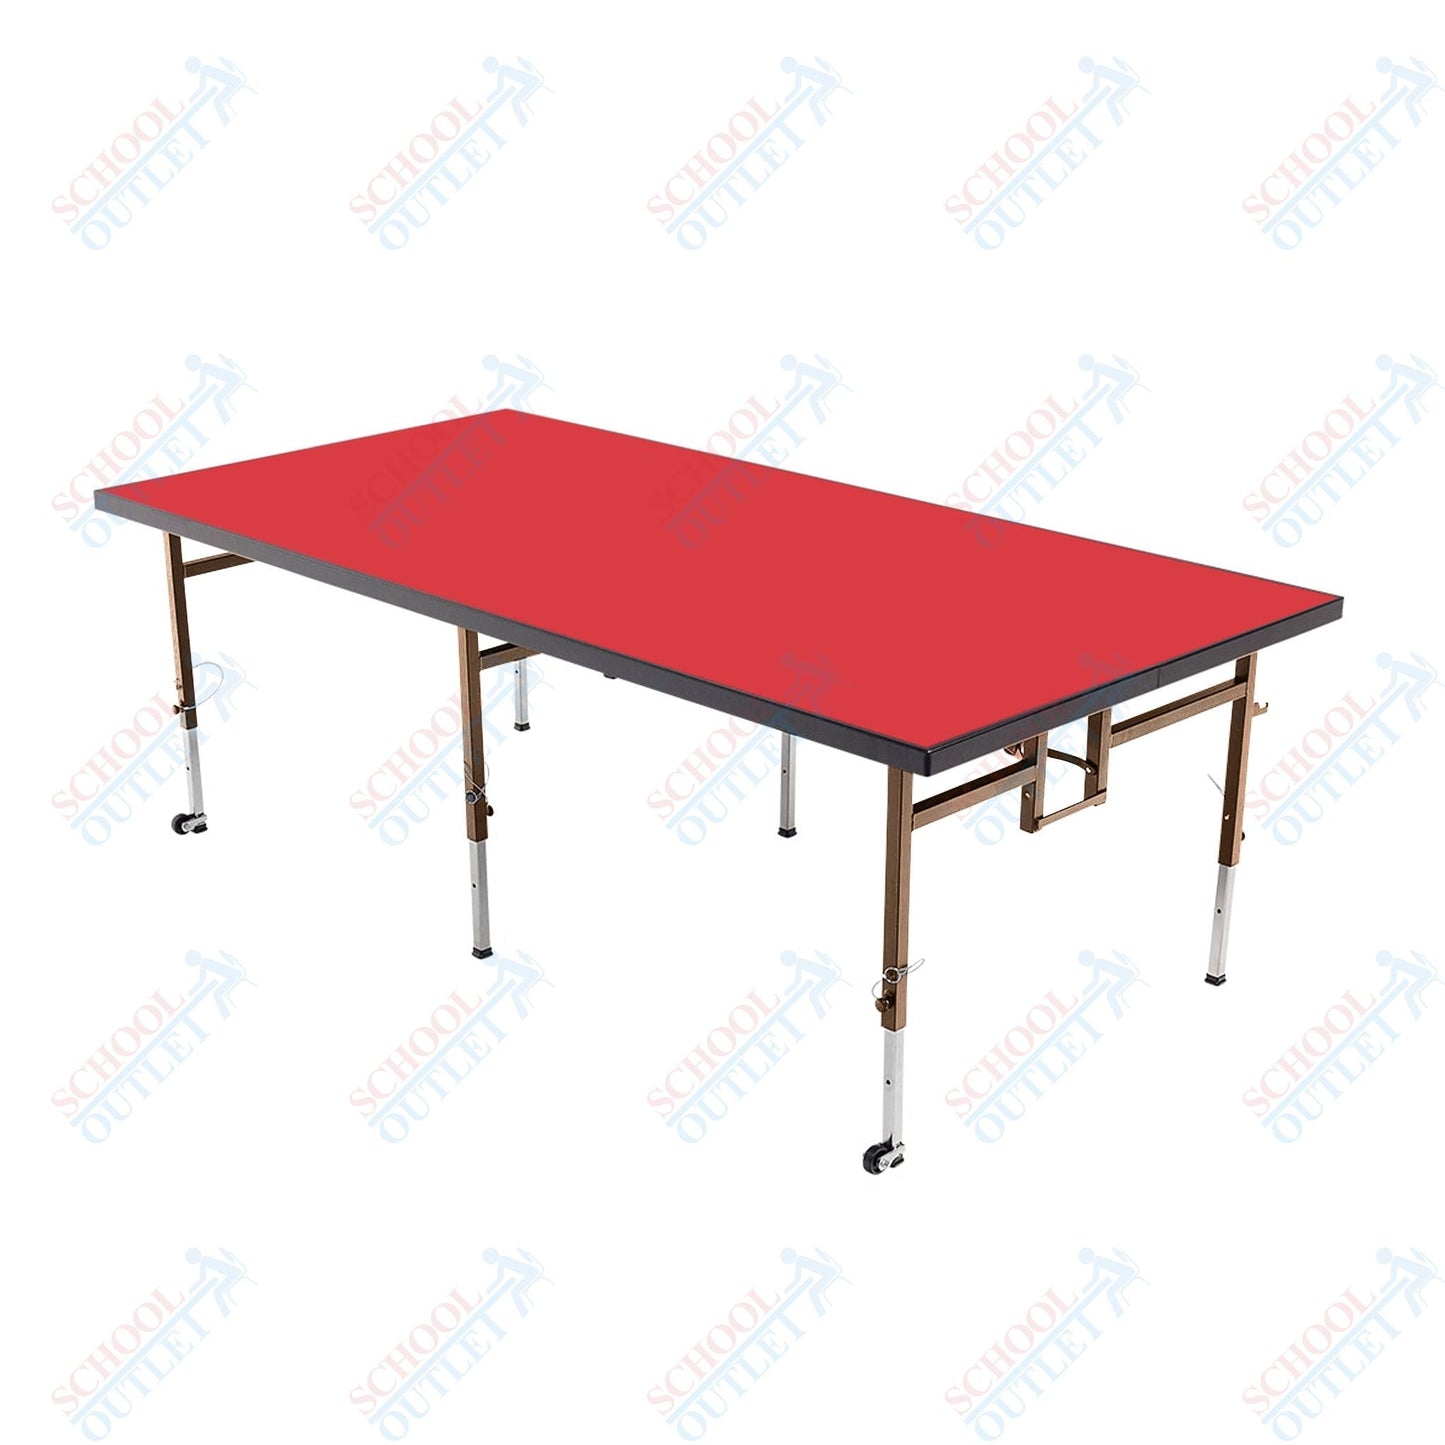 AmTab Adjustable Height Stage - Carpet Top - 48"W x 48"L x Adjustable 16" to 24"H (AmTab AMT-STA4416C) - SchoolOutlet